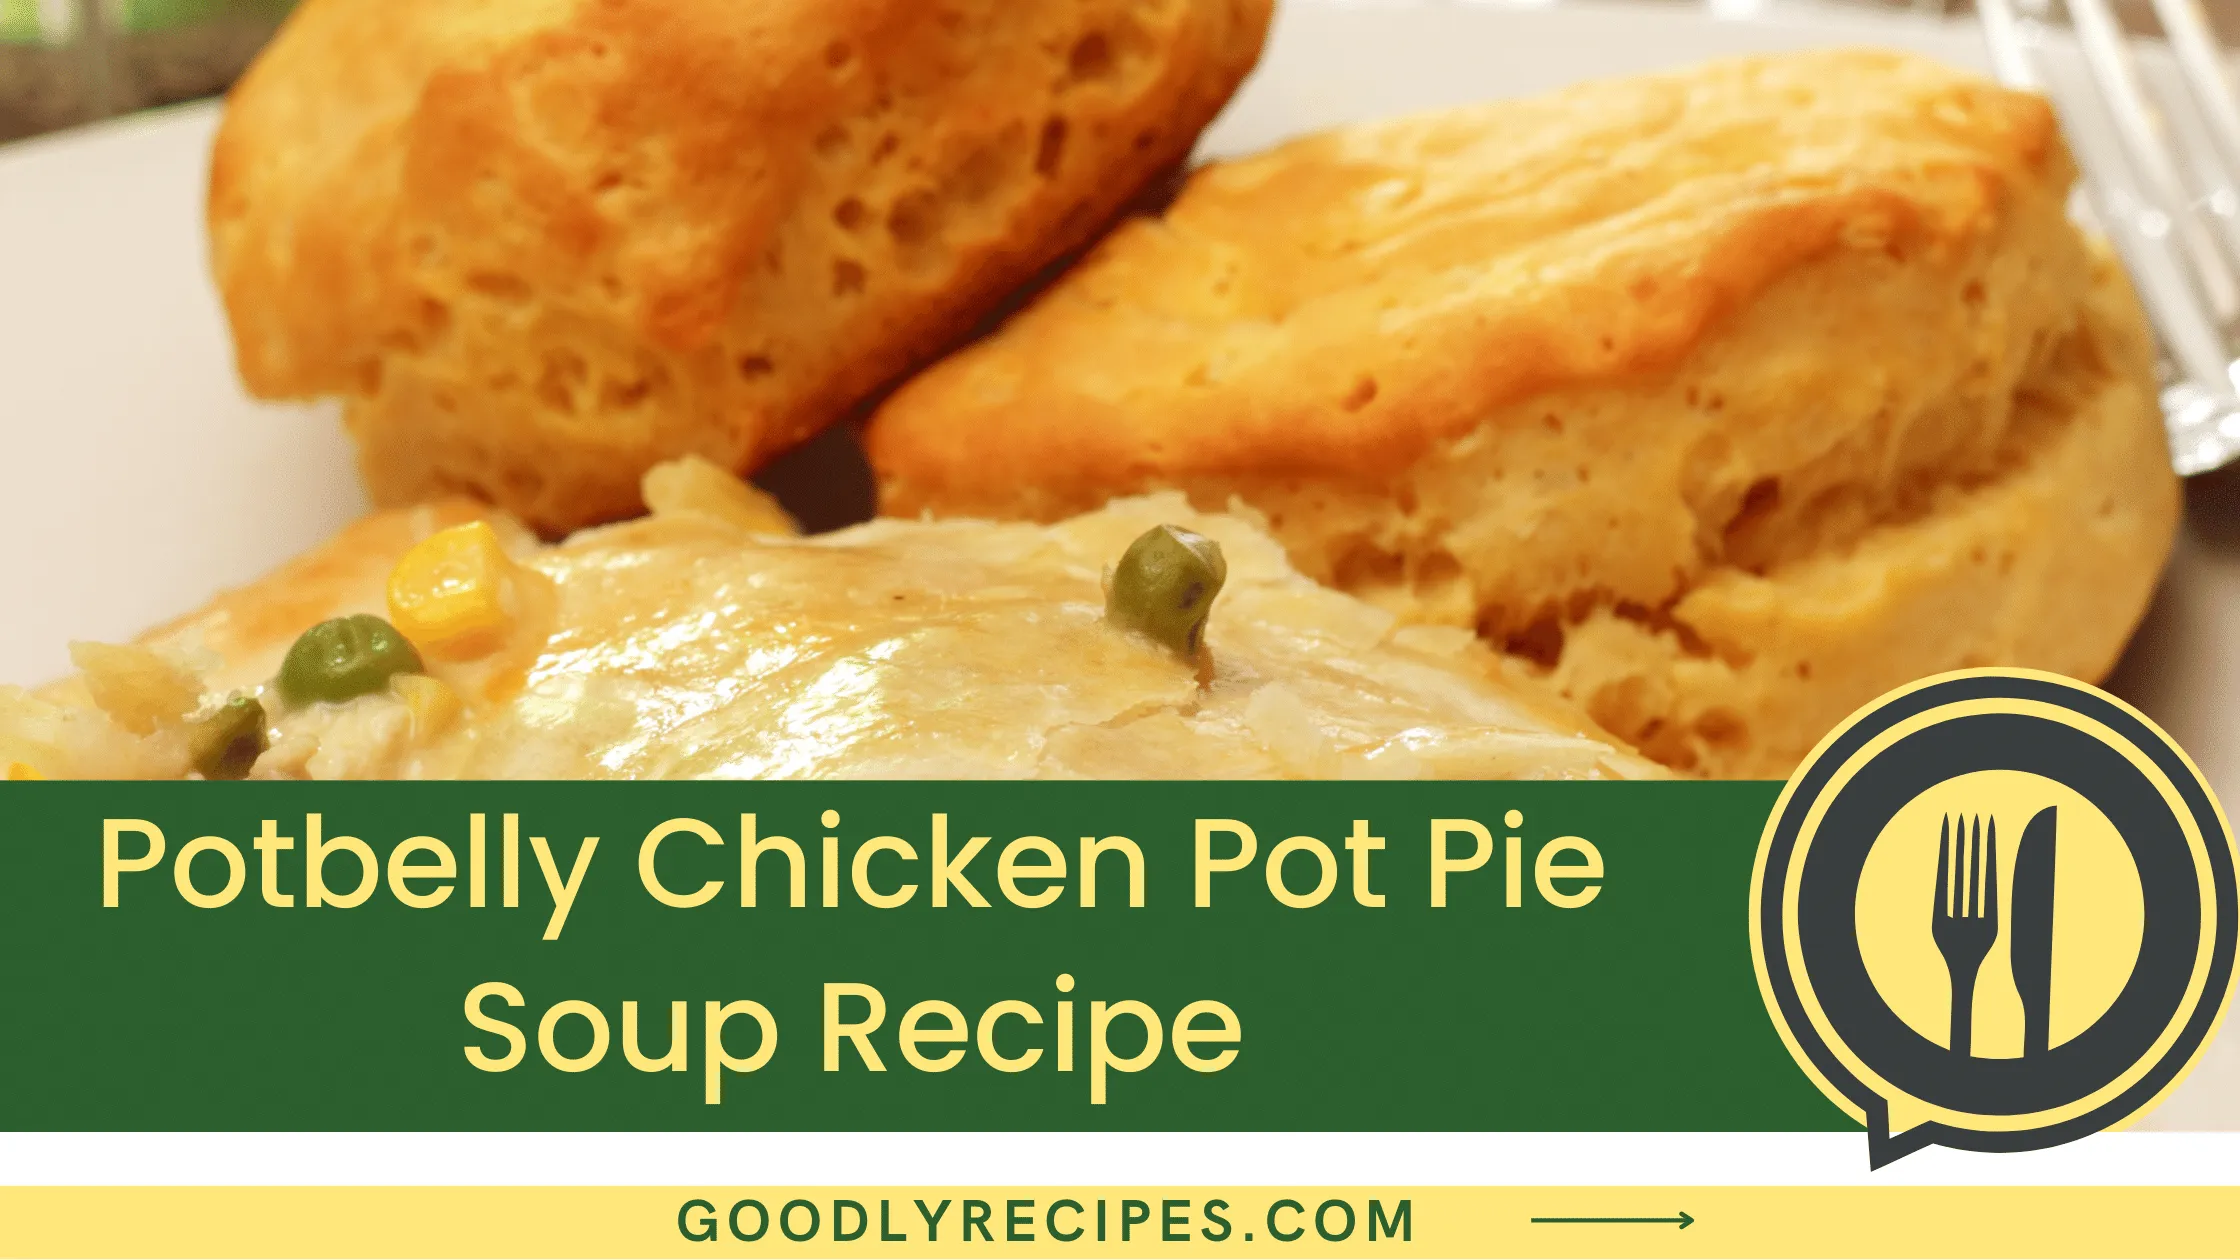 Potbelly Chicken Pot Pie Soup Recipe - For Food Lovers